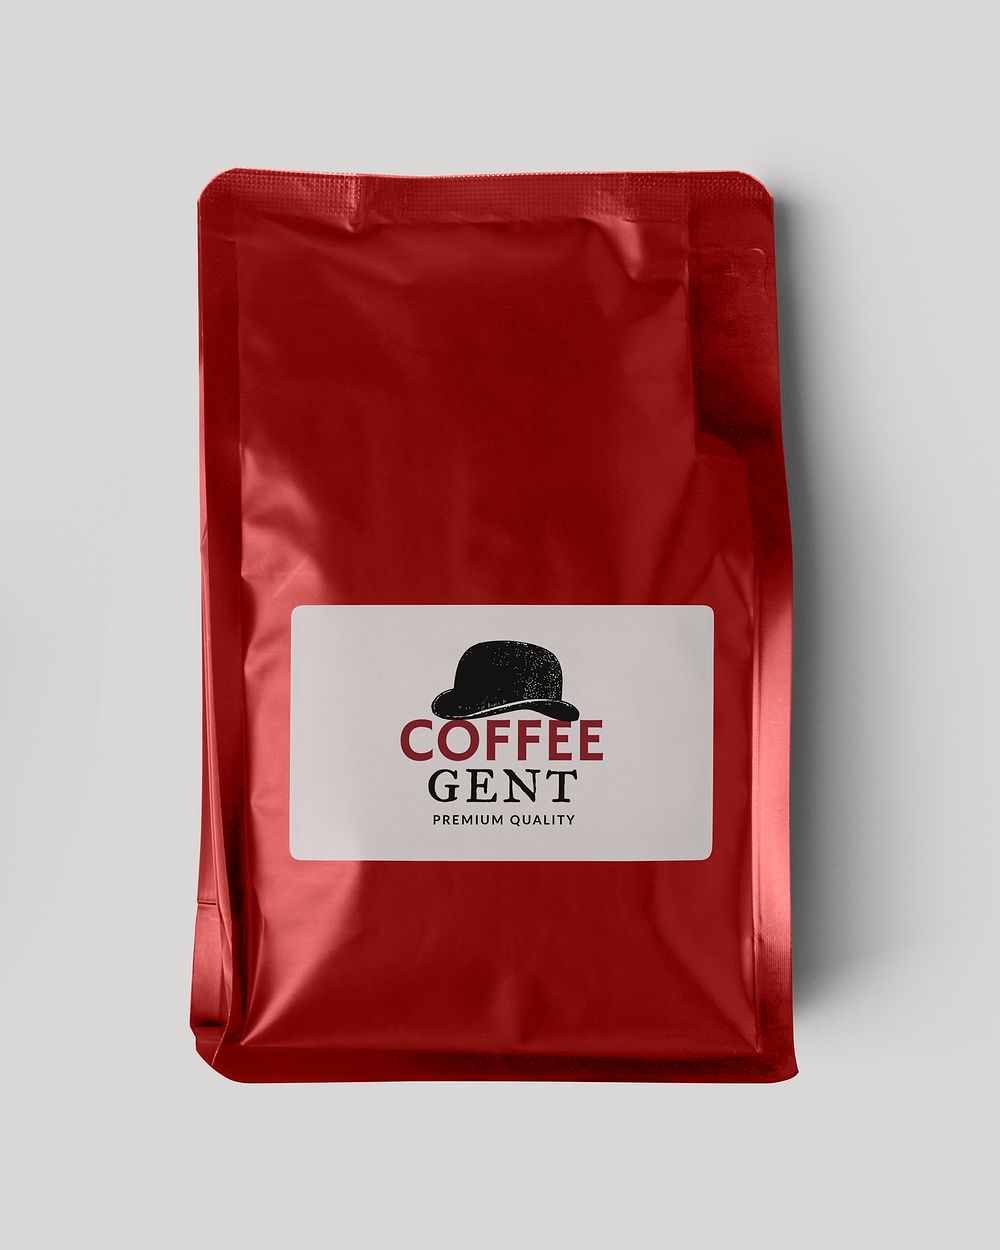 Coffee bag mockup psd, product packaging design